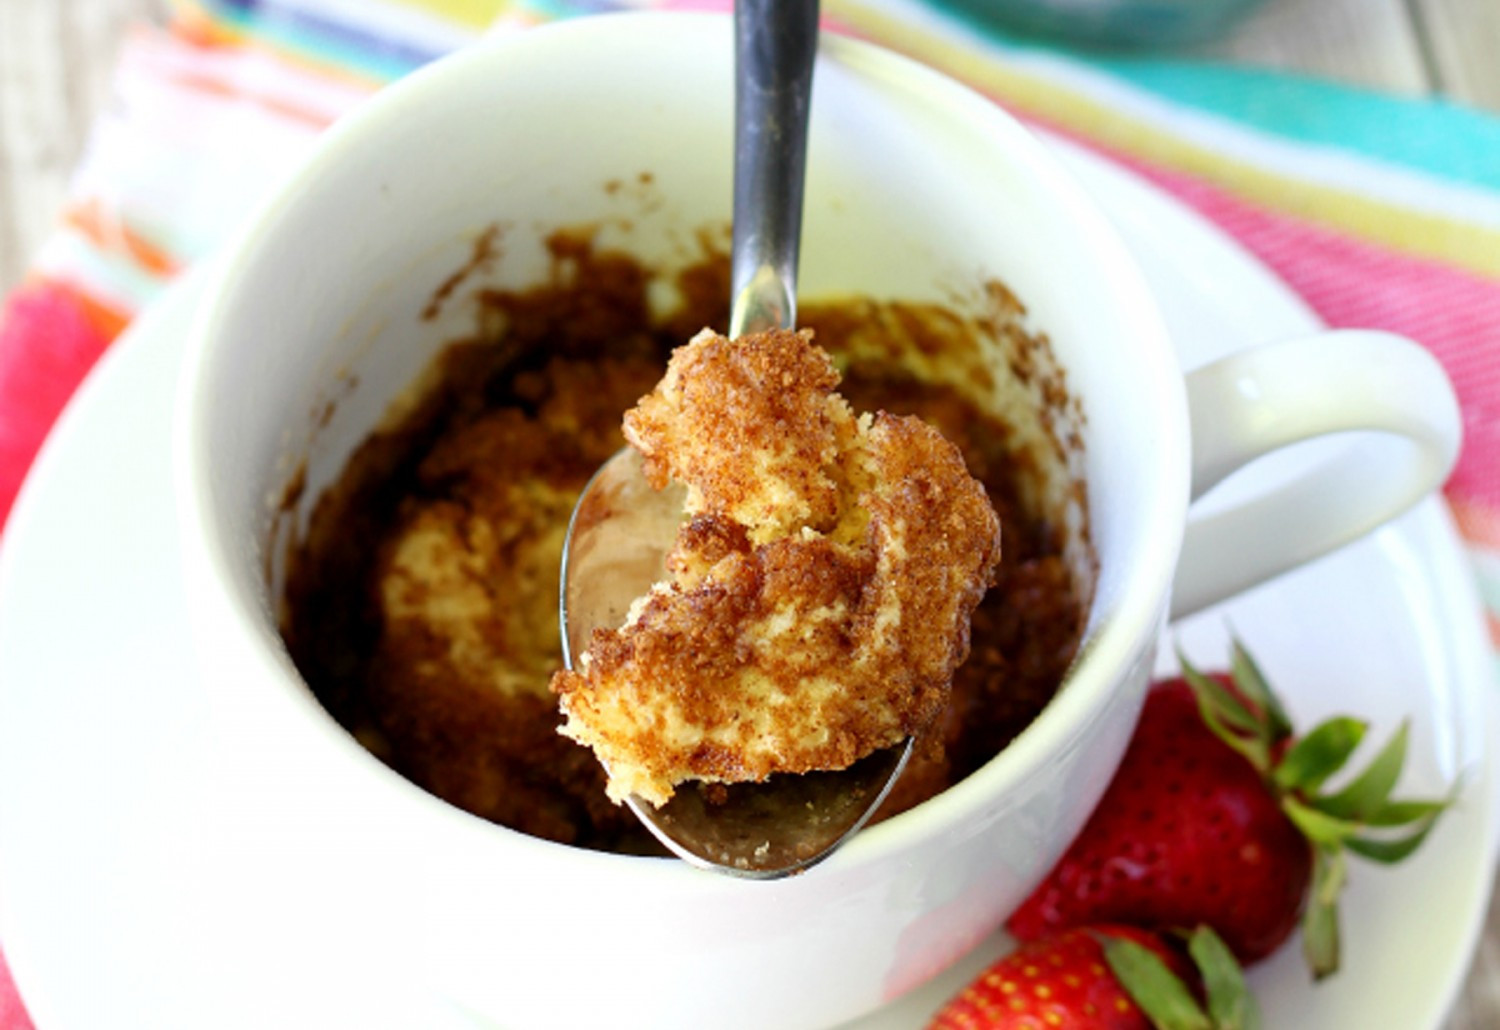 Healthy Mug Desserts
 Quick Healthy Meals You Can Make in a Mug